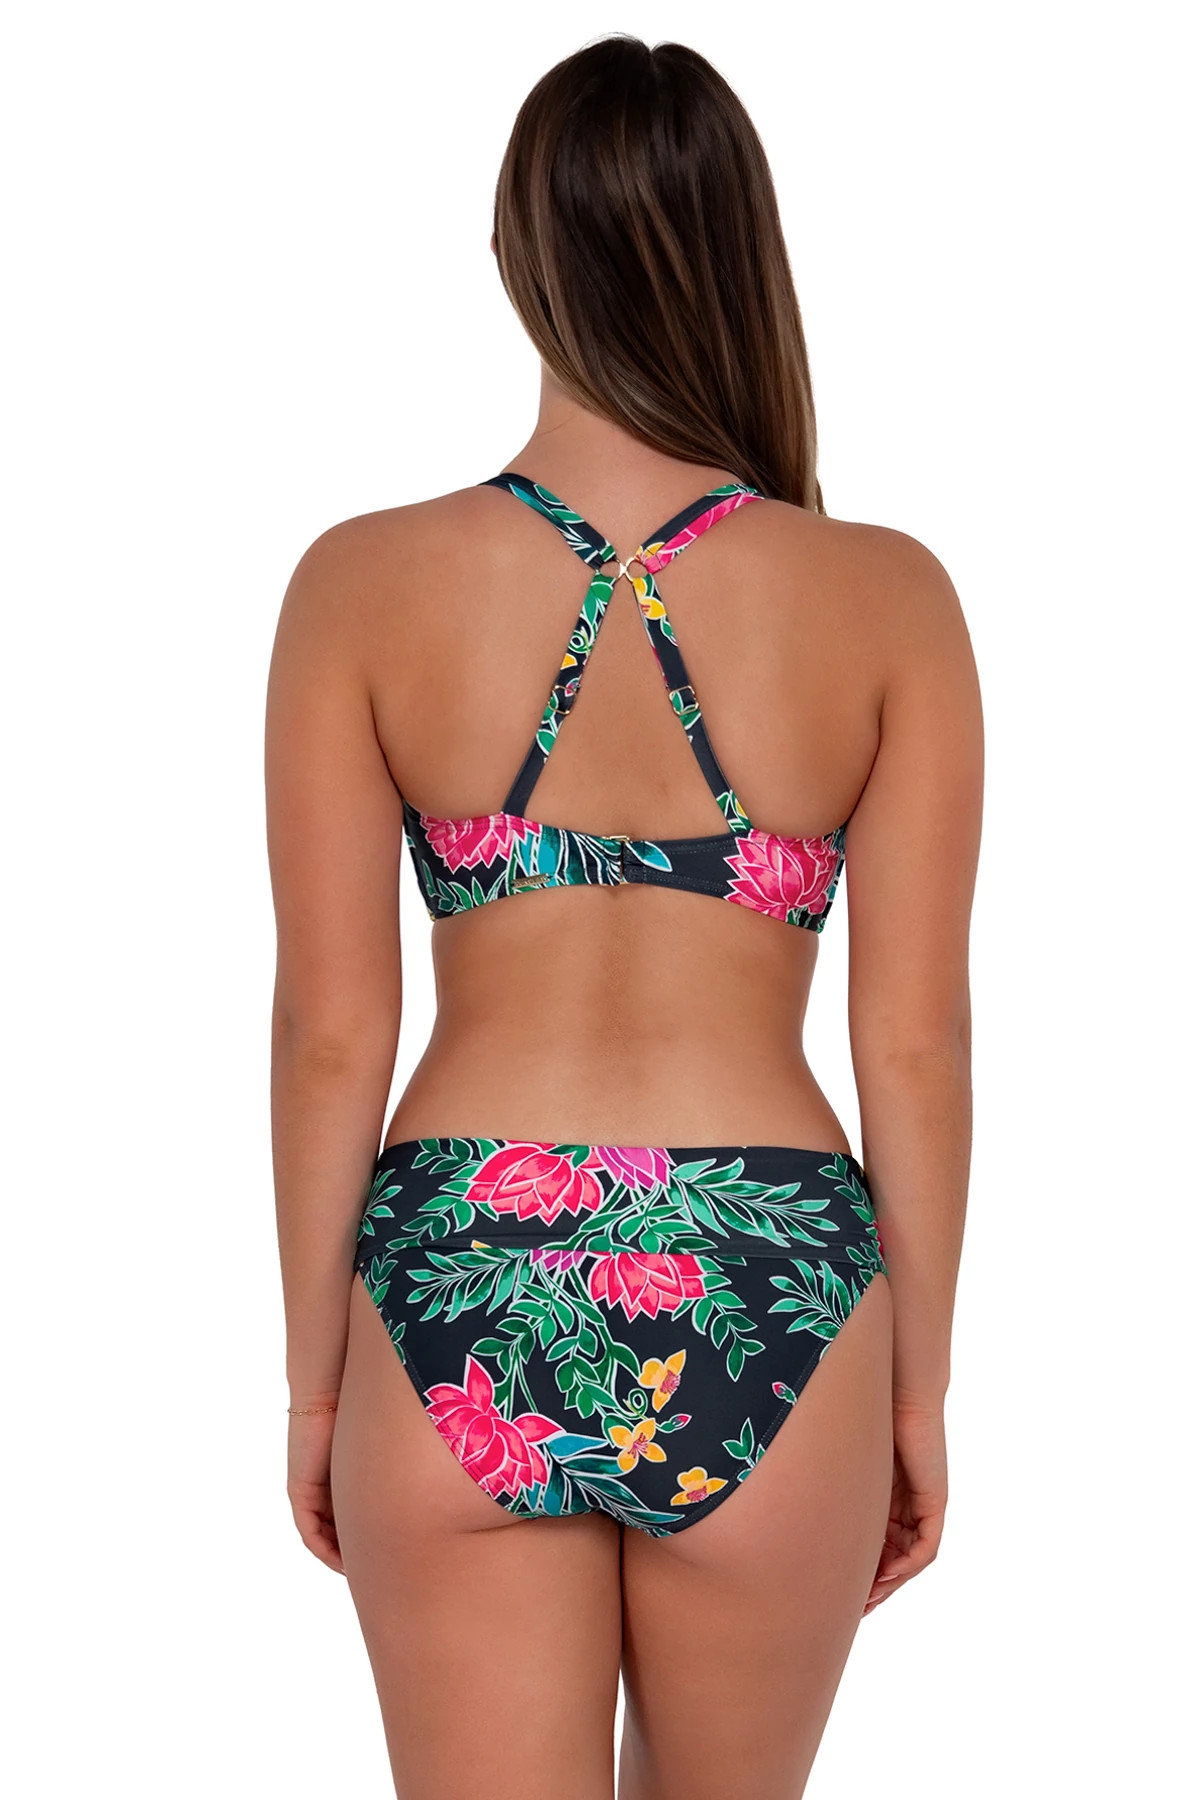 TWILIGHT BLOOMS Taylor Underwire Bralette Bikini Top (E-H Cup) image number 2